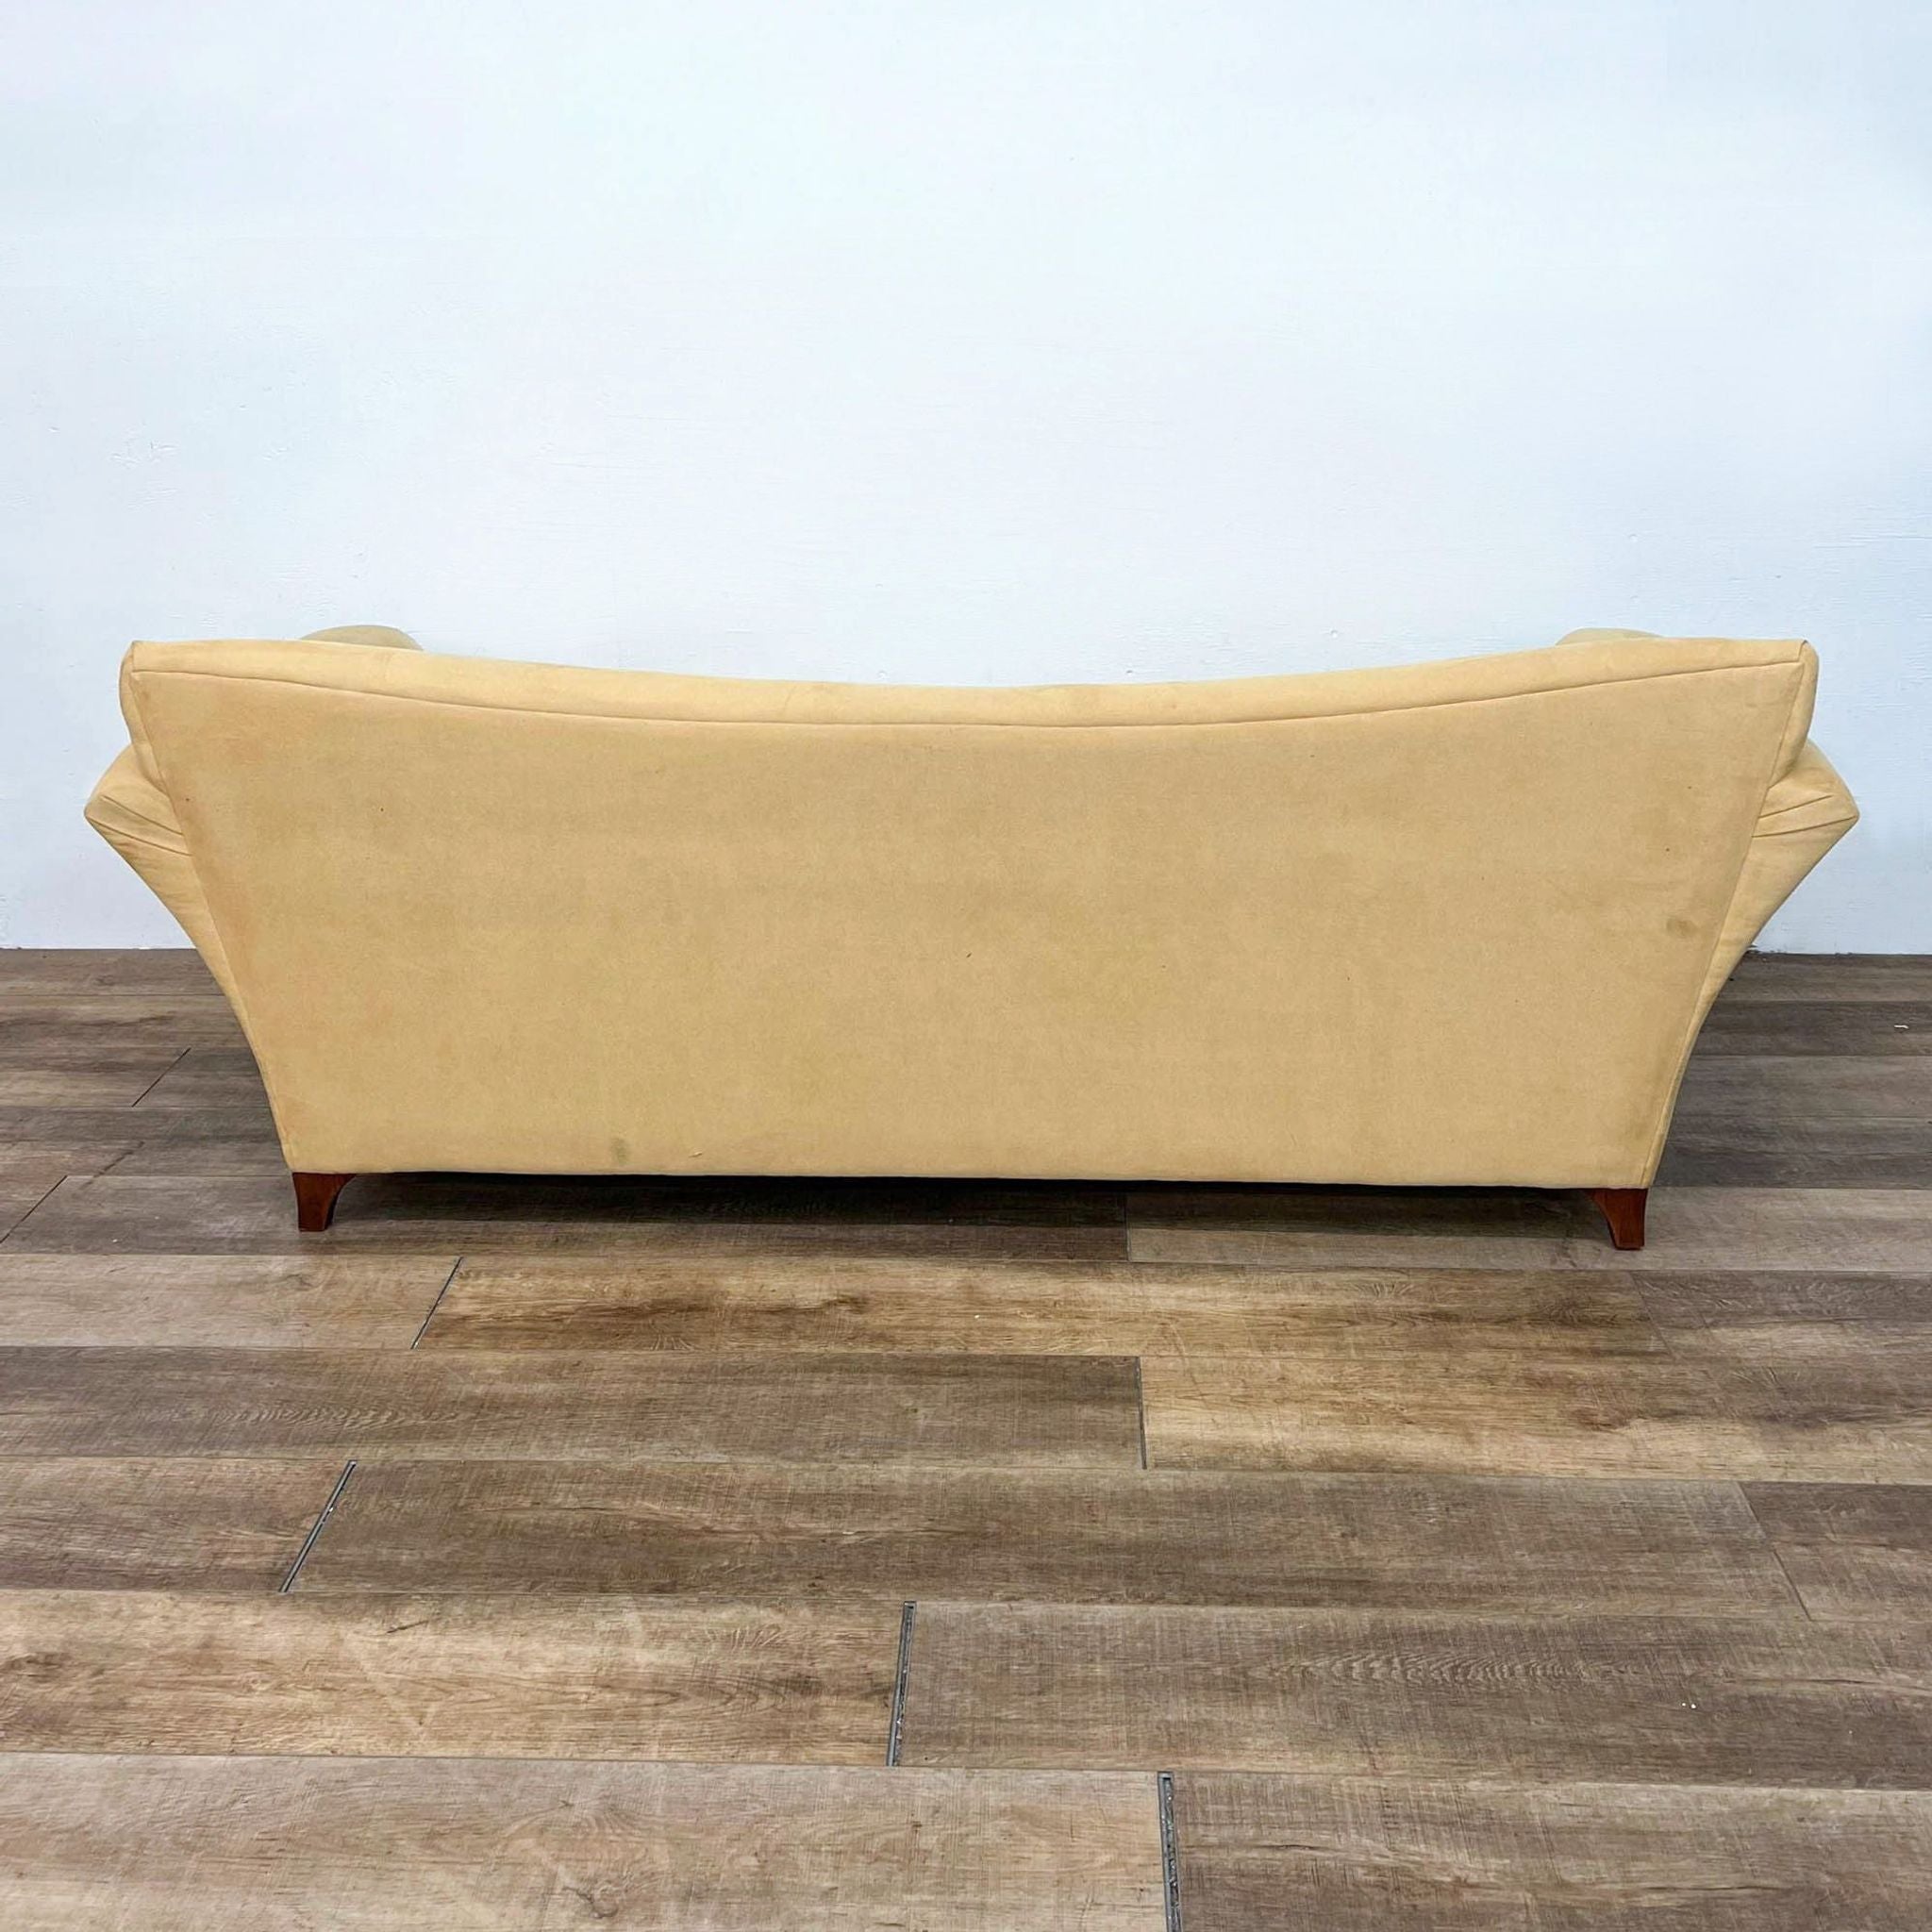 Alt text: Rear view of a Reperch brand 3-seat flared arm straight back sofa with wooden feet on a wooden floor.